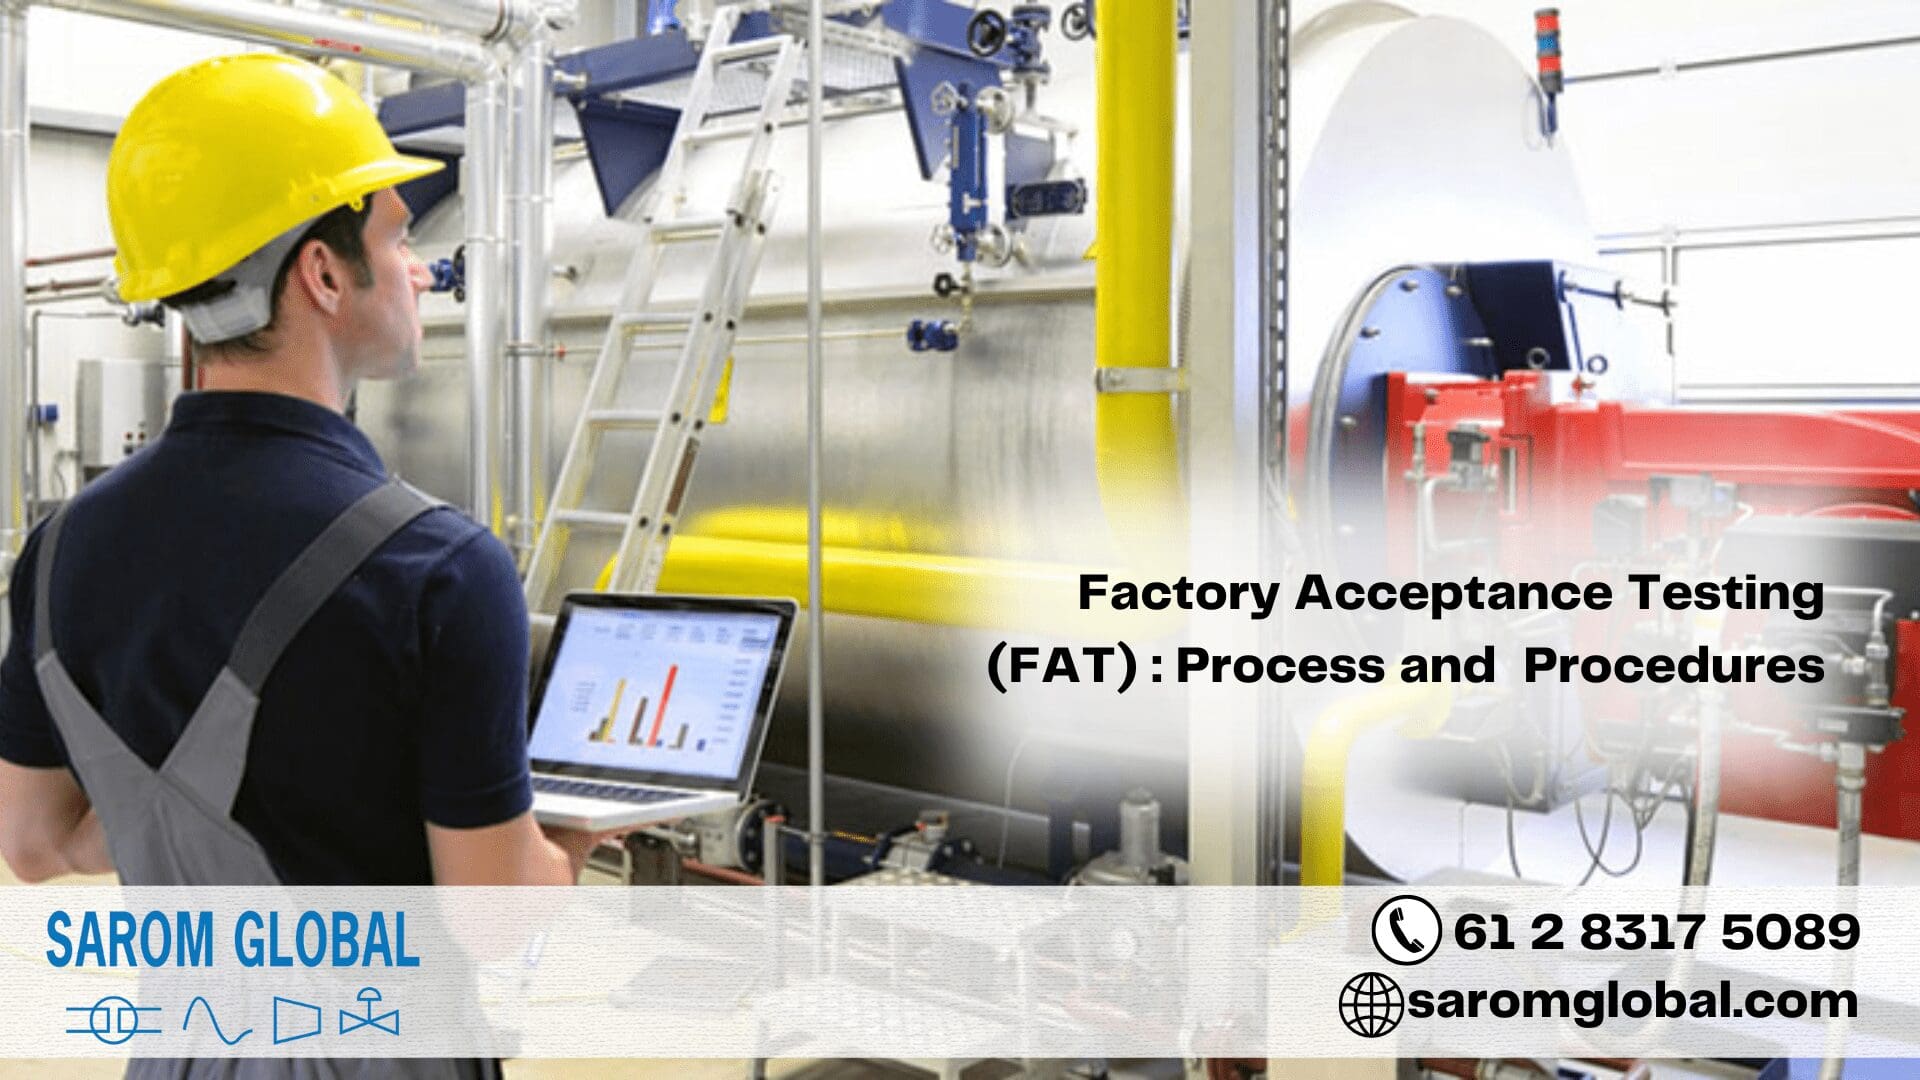 Factory Acceptance Testing (FAT)